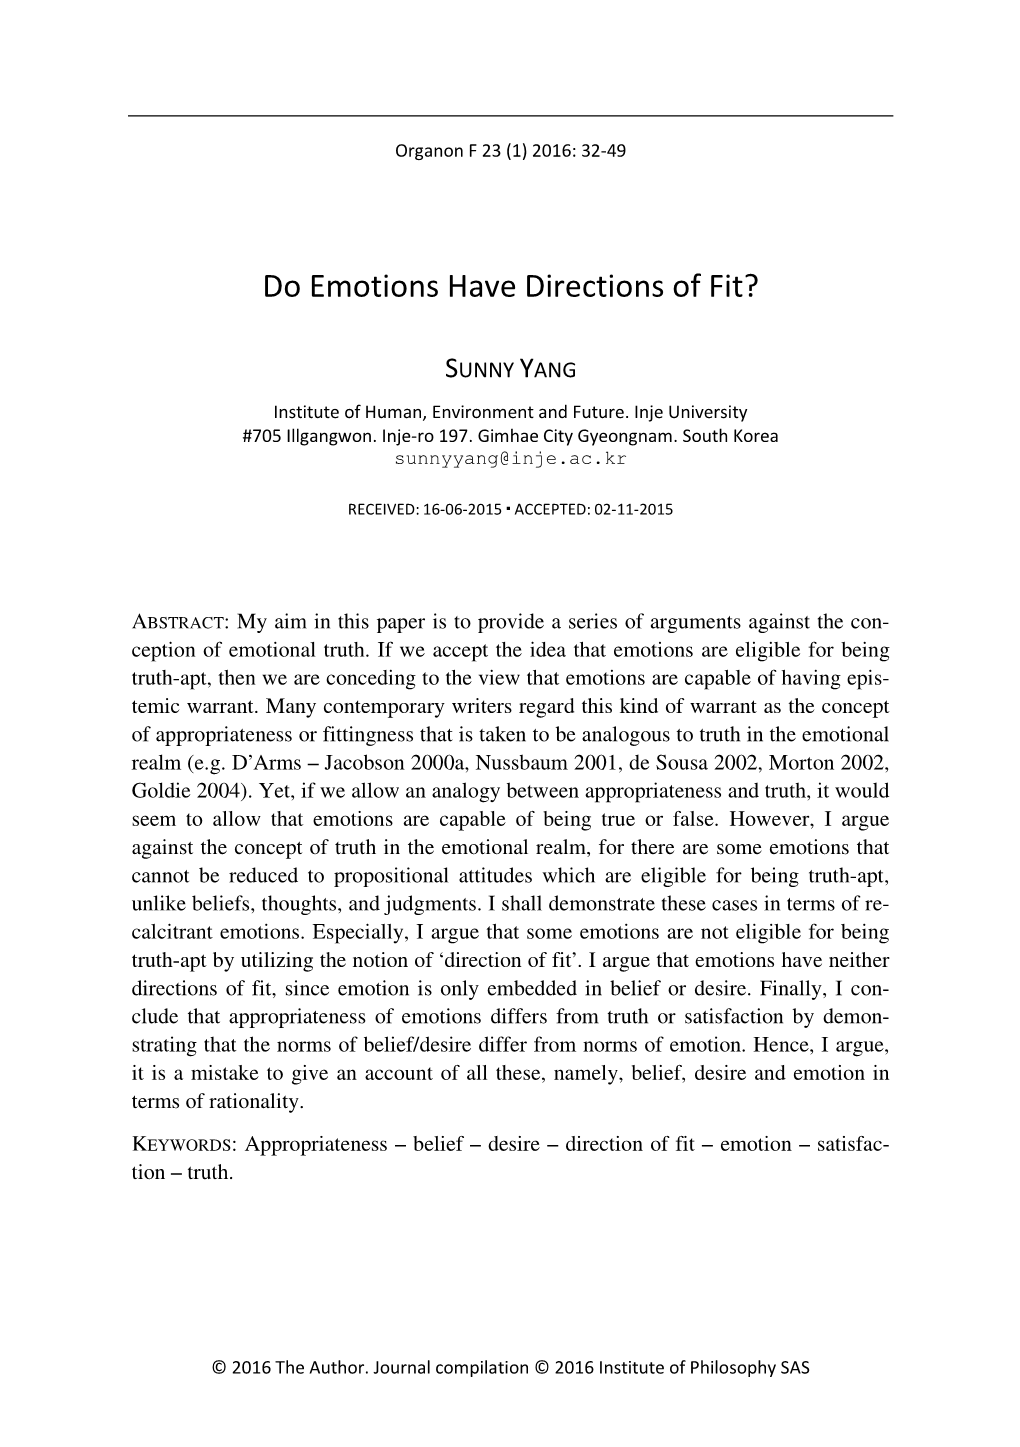 Do Emotions Have Directions of Fit?